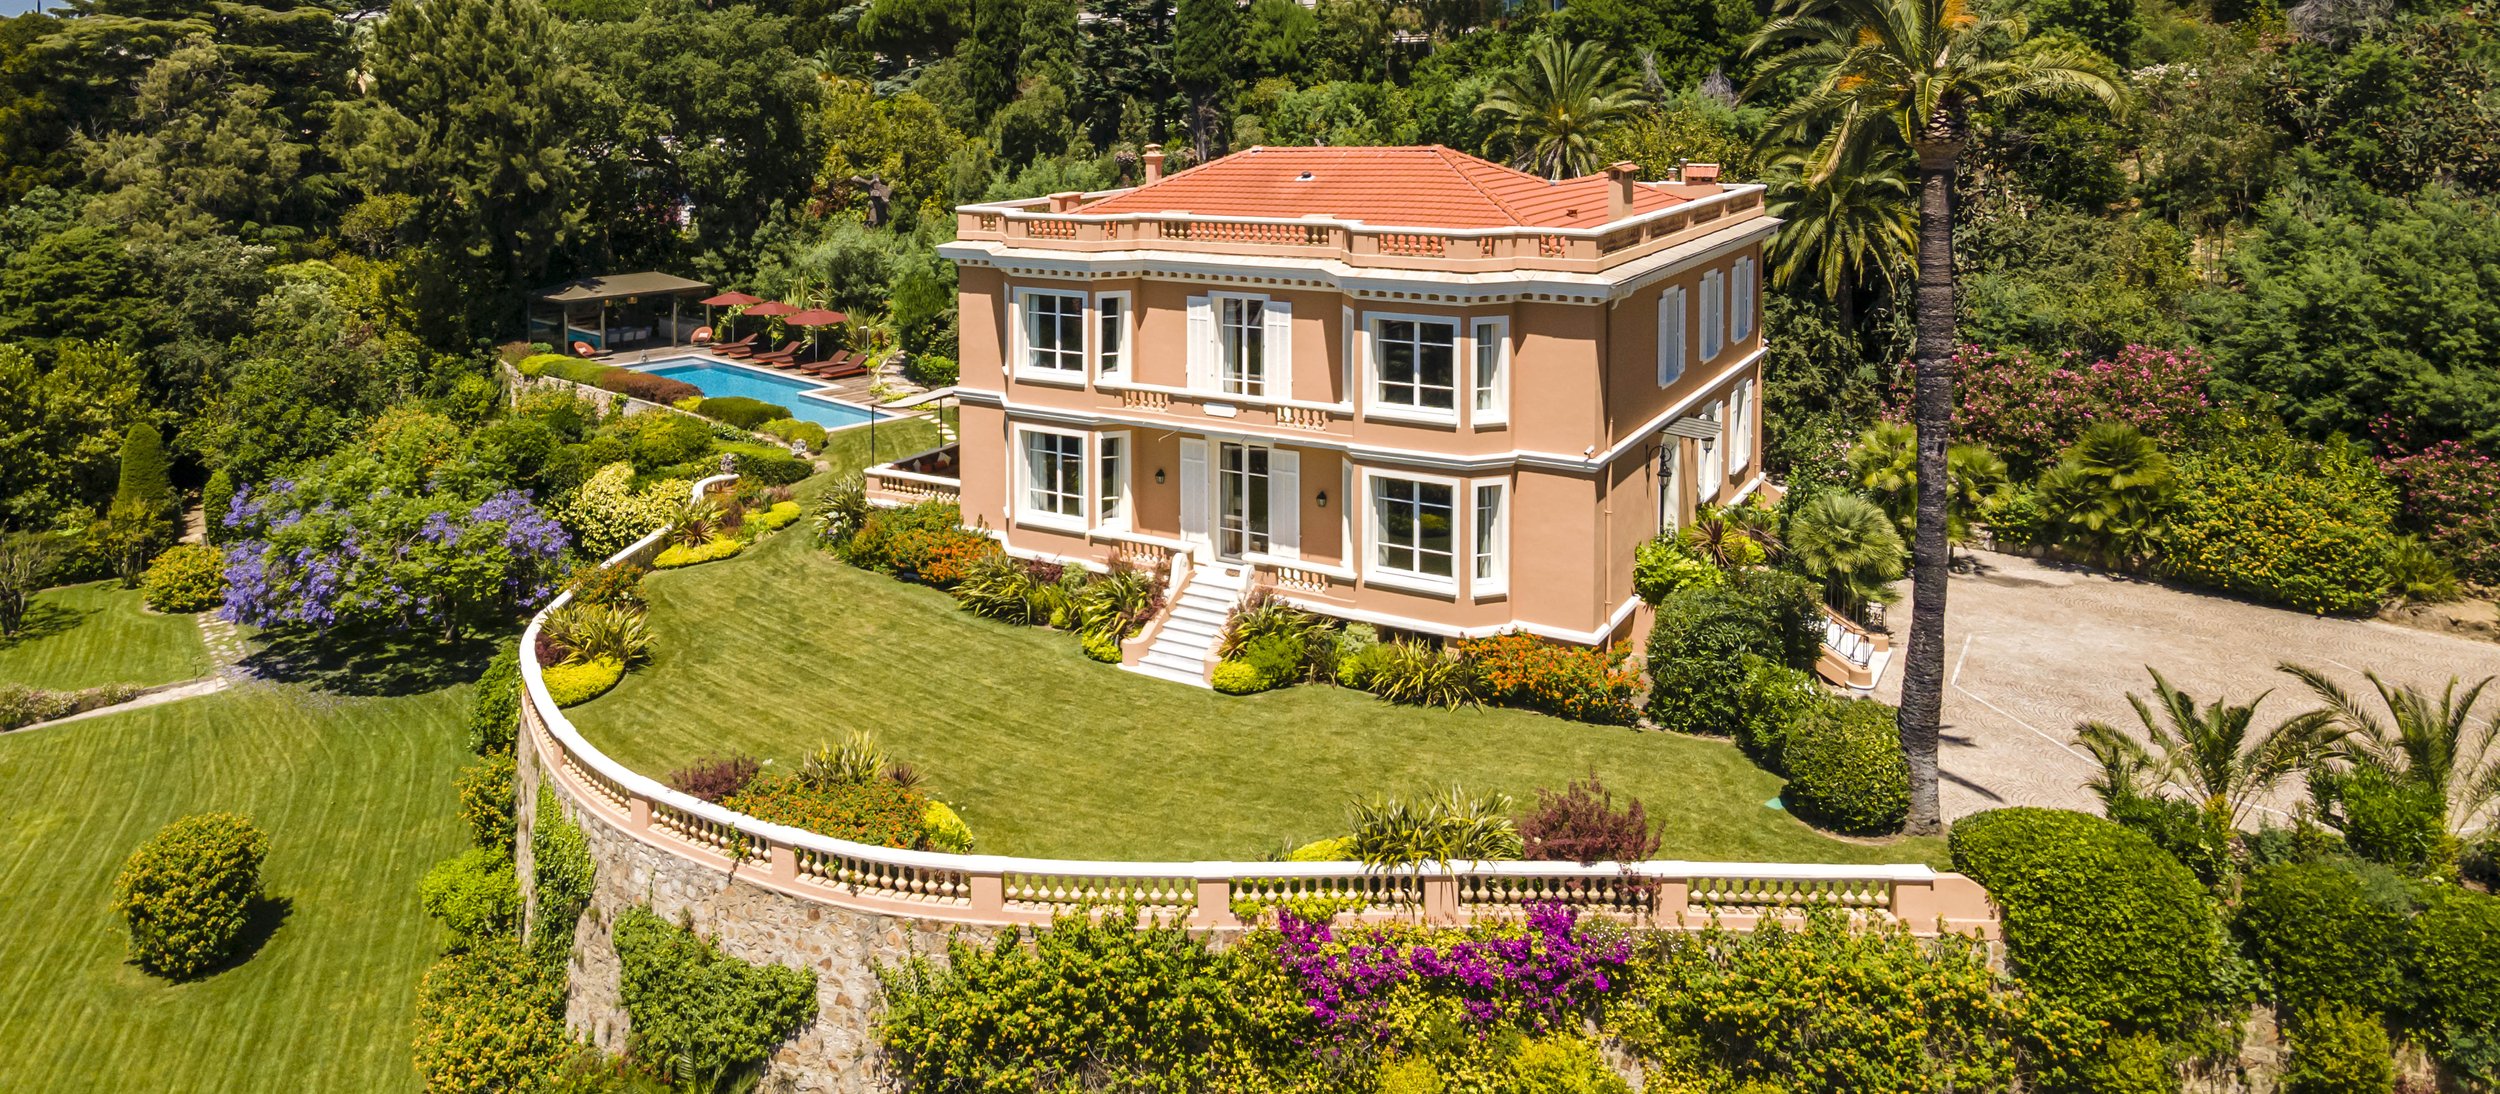 Francis York Luxury Holiday Rental in the Hills of Cannes, France 5.jpg